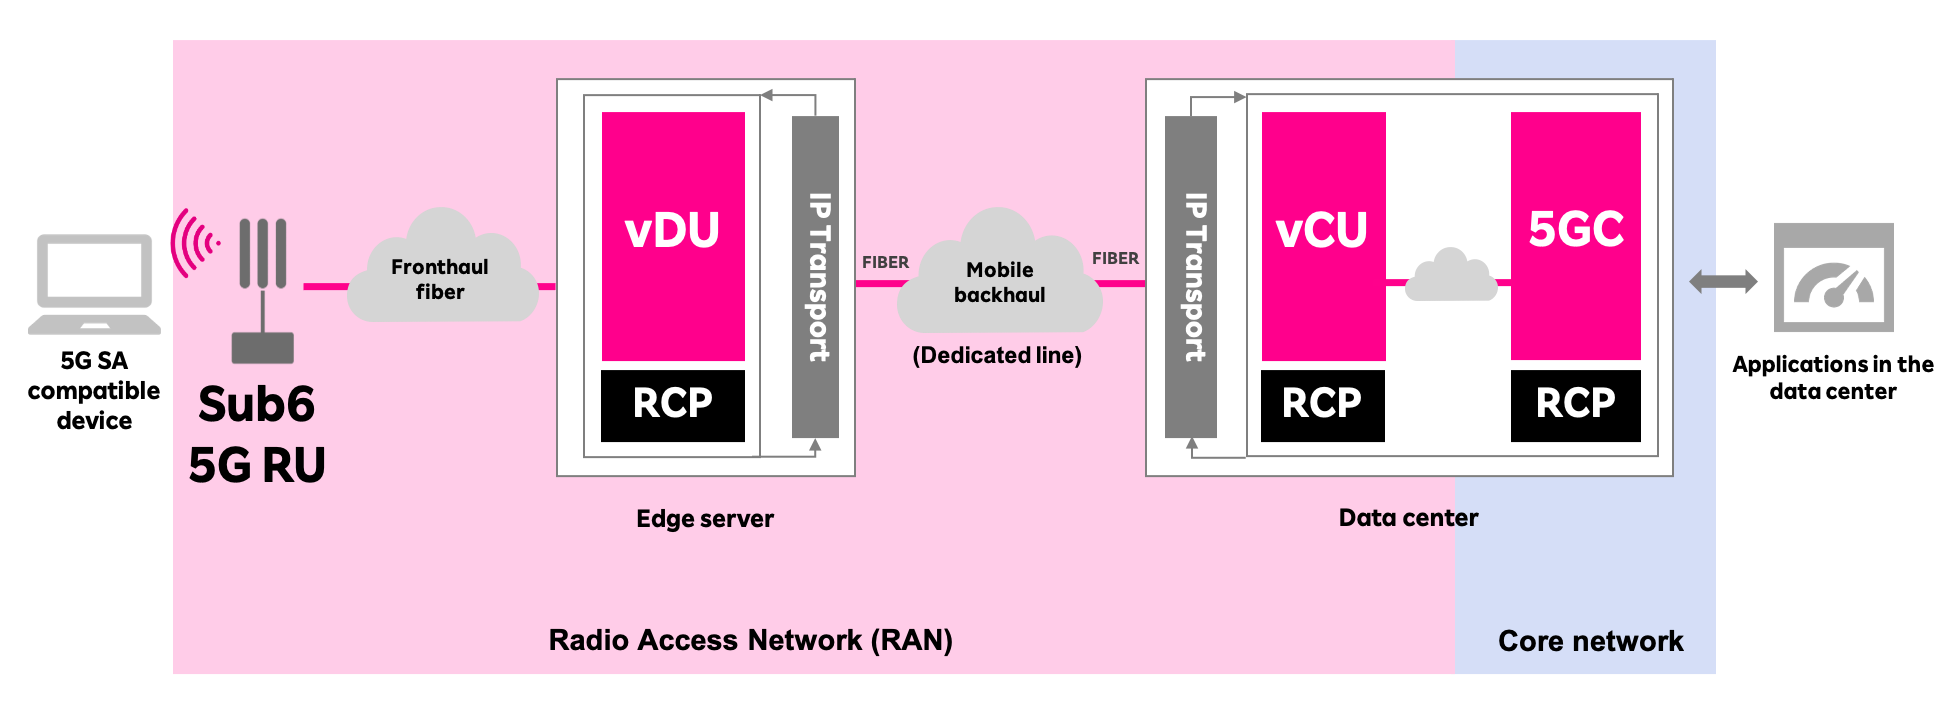 Diagram of the 5G SA network architecture used